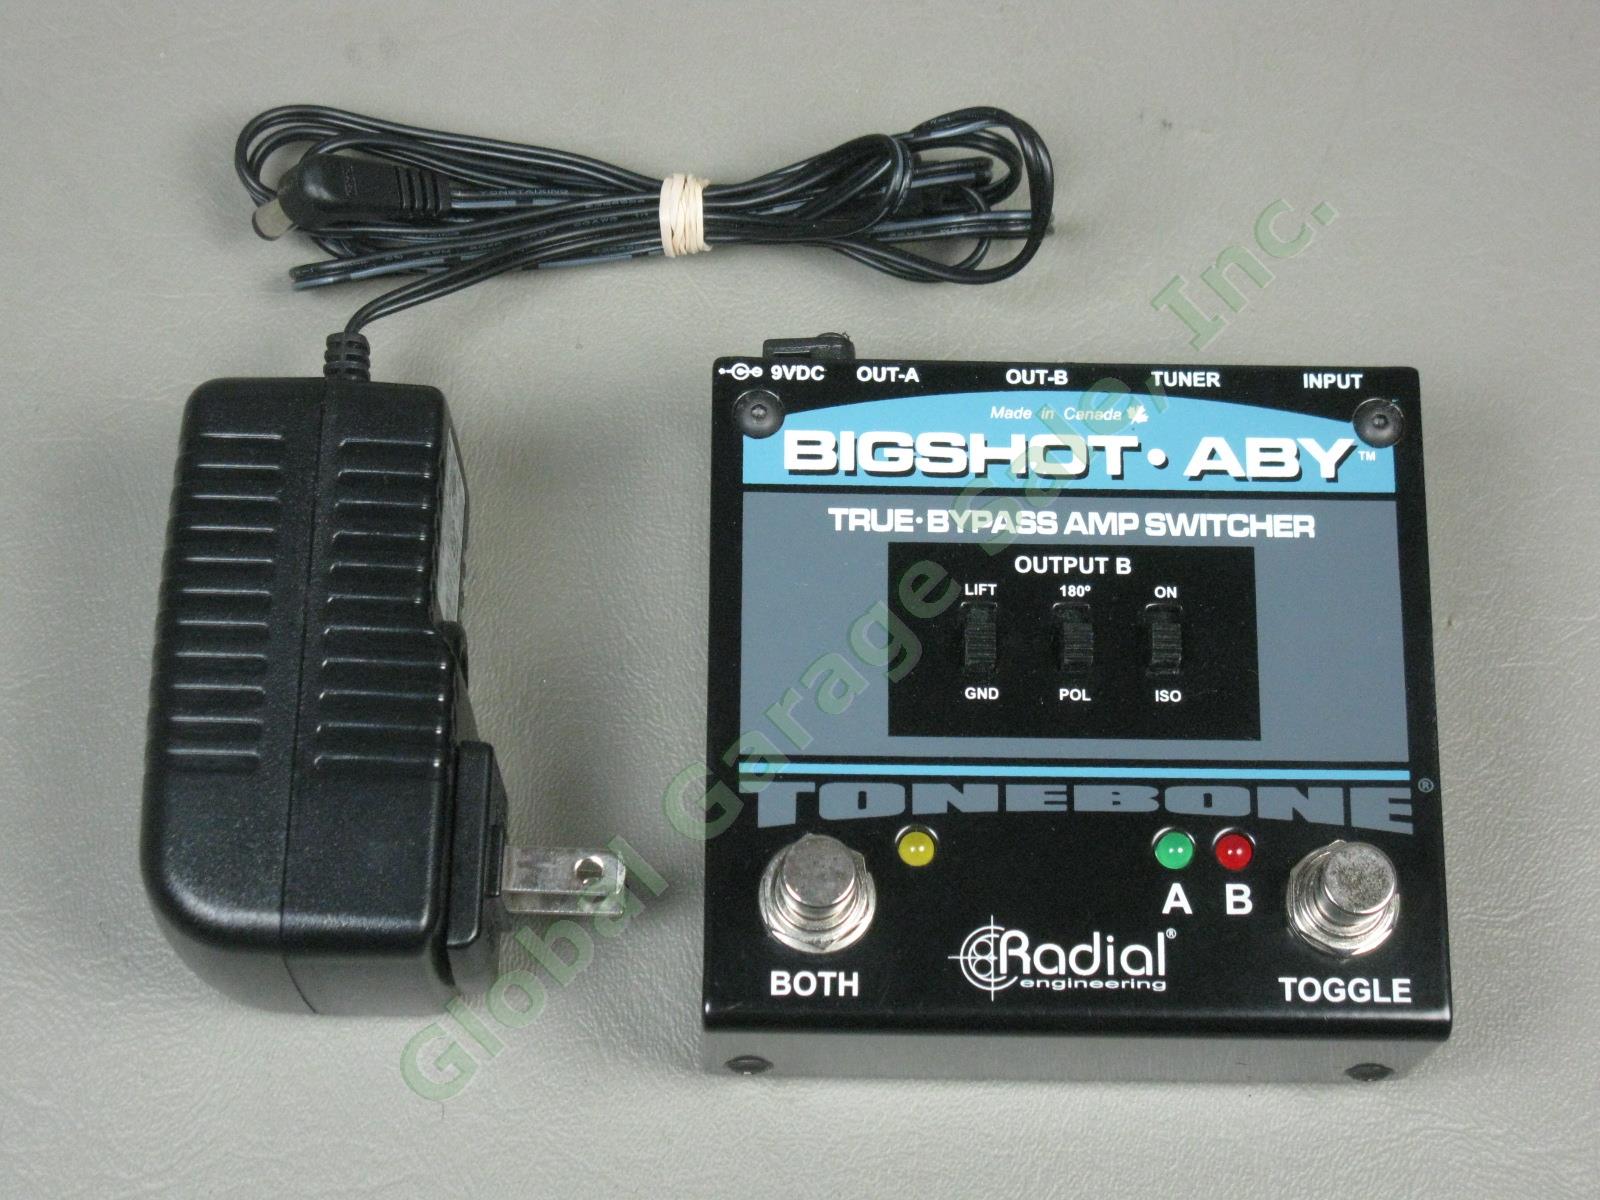 Radial Tonebone Bigshot ABY True Bypass A/B Amp Switcher Guitar Pedal EXC COND!